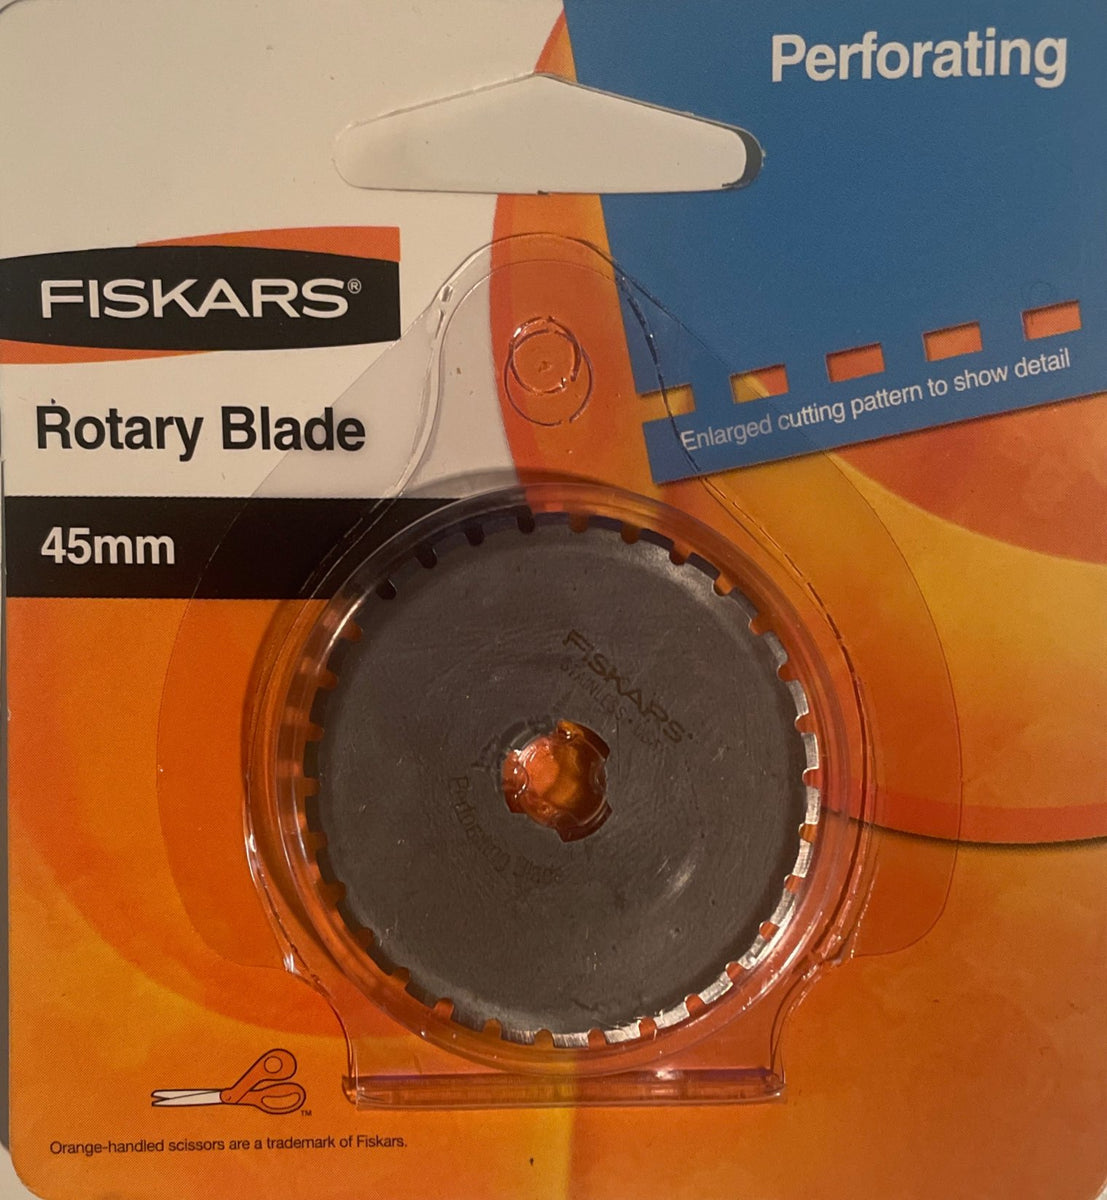 Fiskars Rotary Trimmer Replacement Blade 28mm Scallop